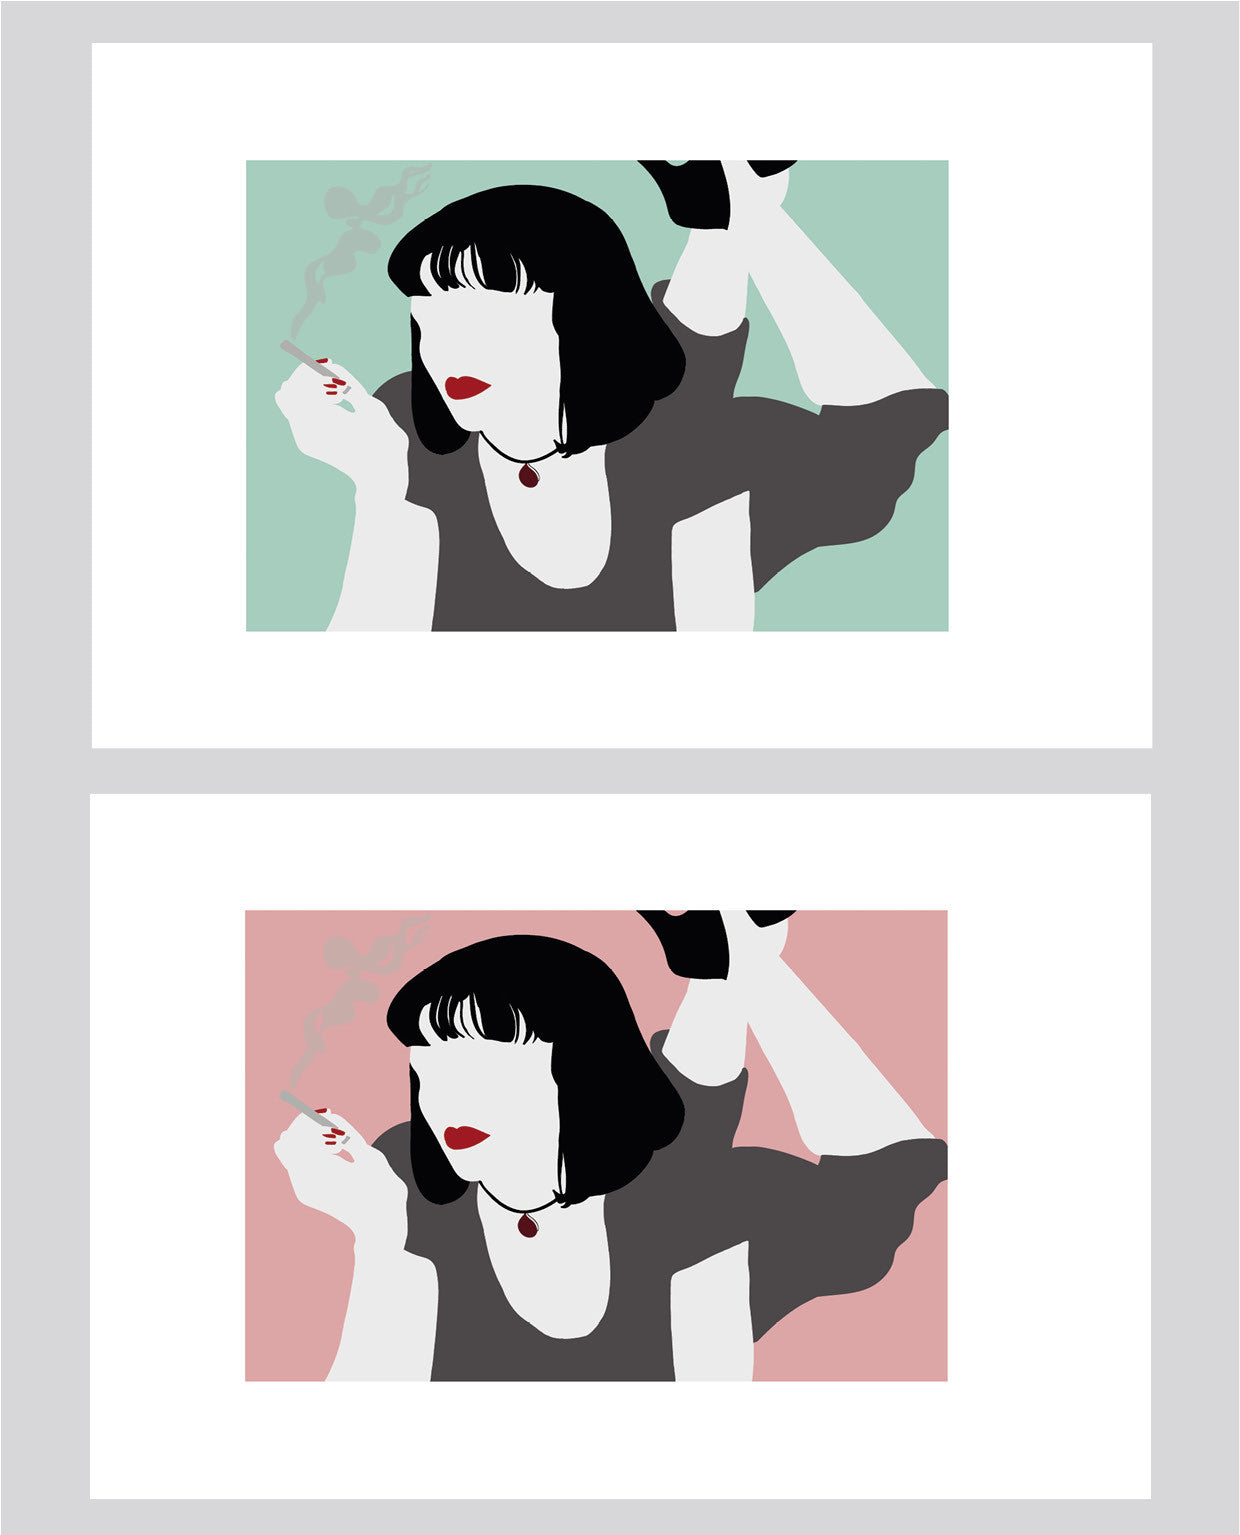 wall art illustration of Mia Wallace from Quentin Tarantino’s Pulp Fiction as different colour options